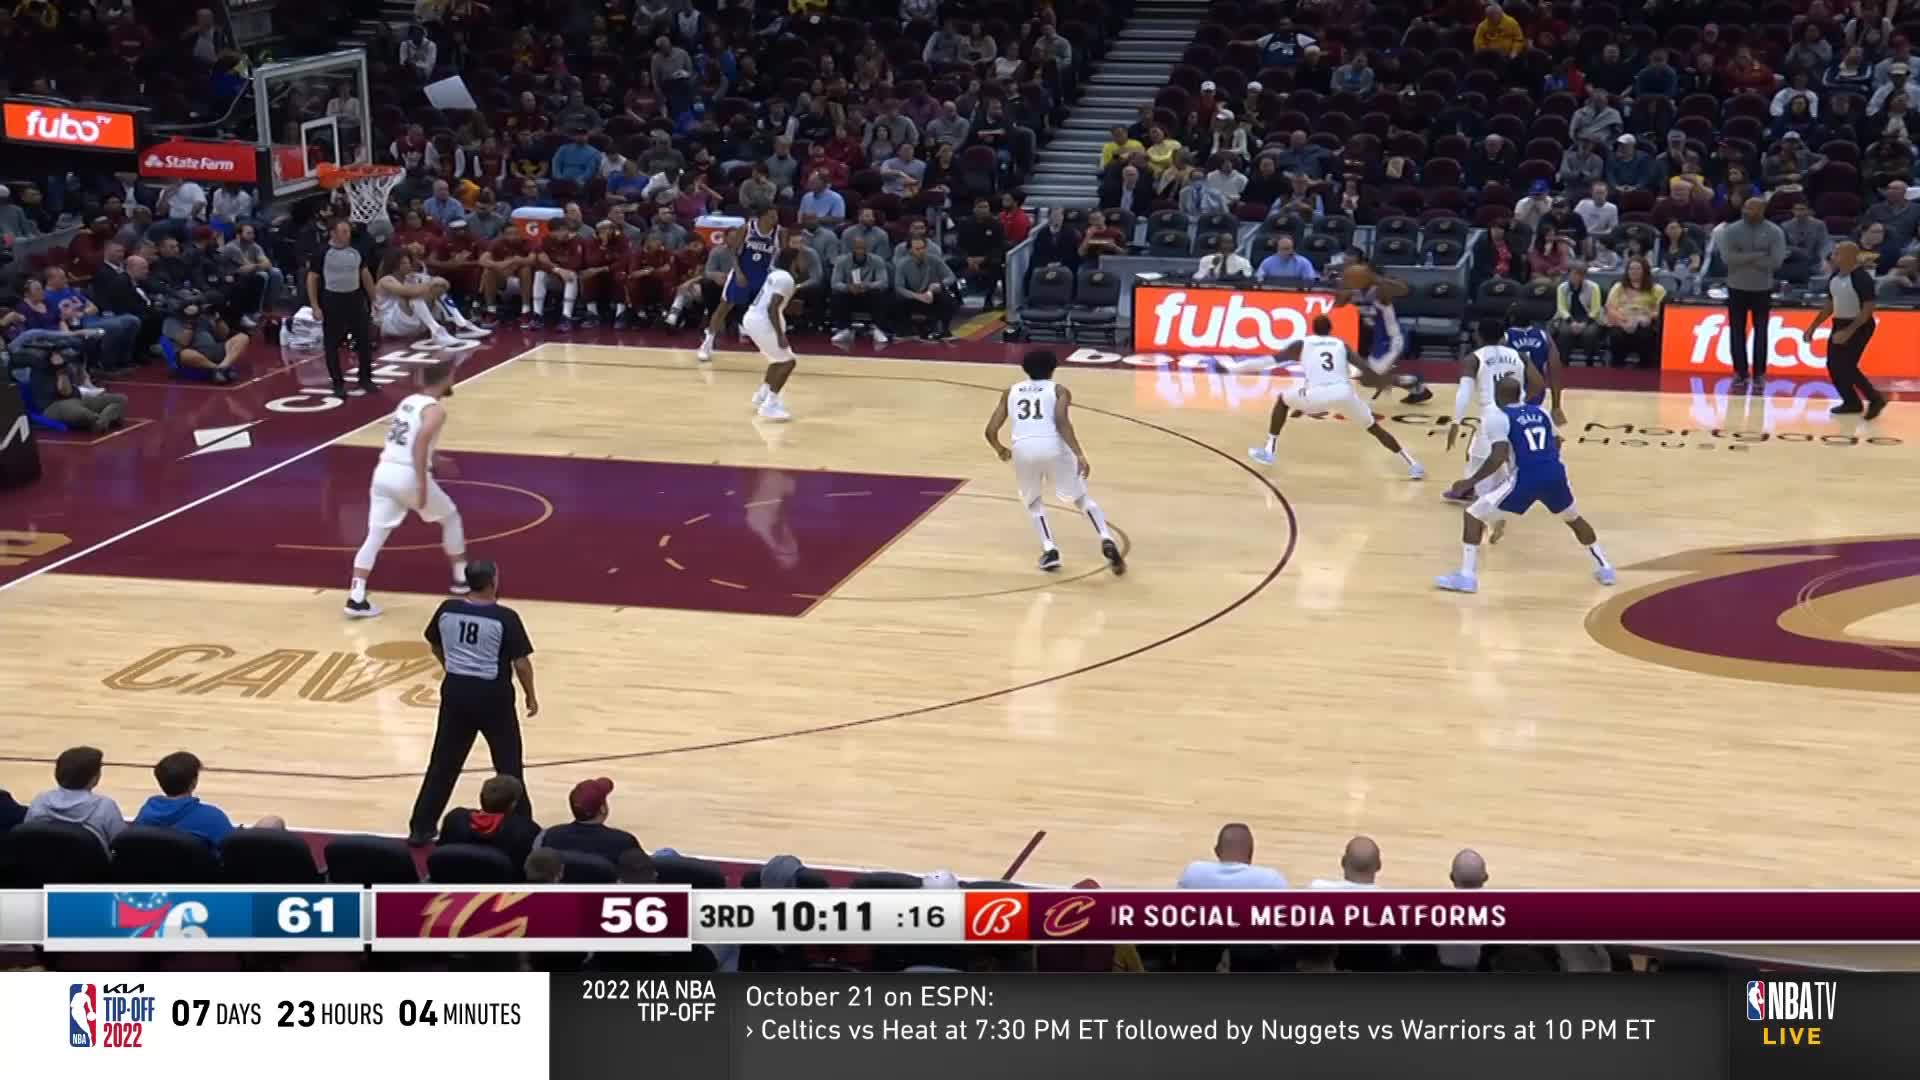 Tobias Harris with a 3-pointer vs the Cleveland Cavaliers